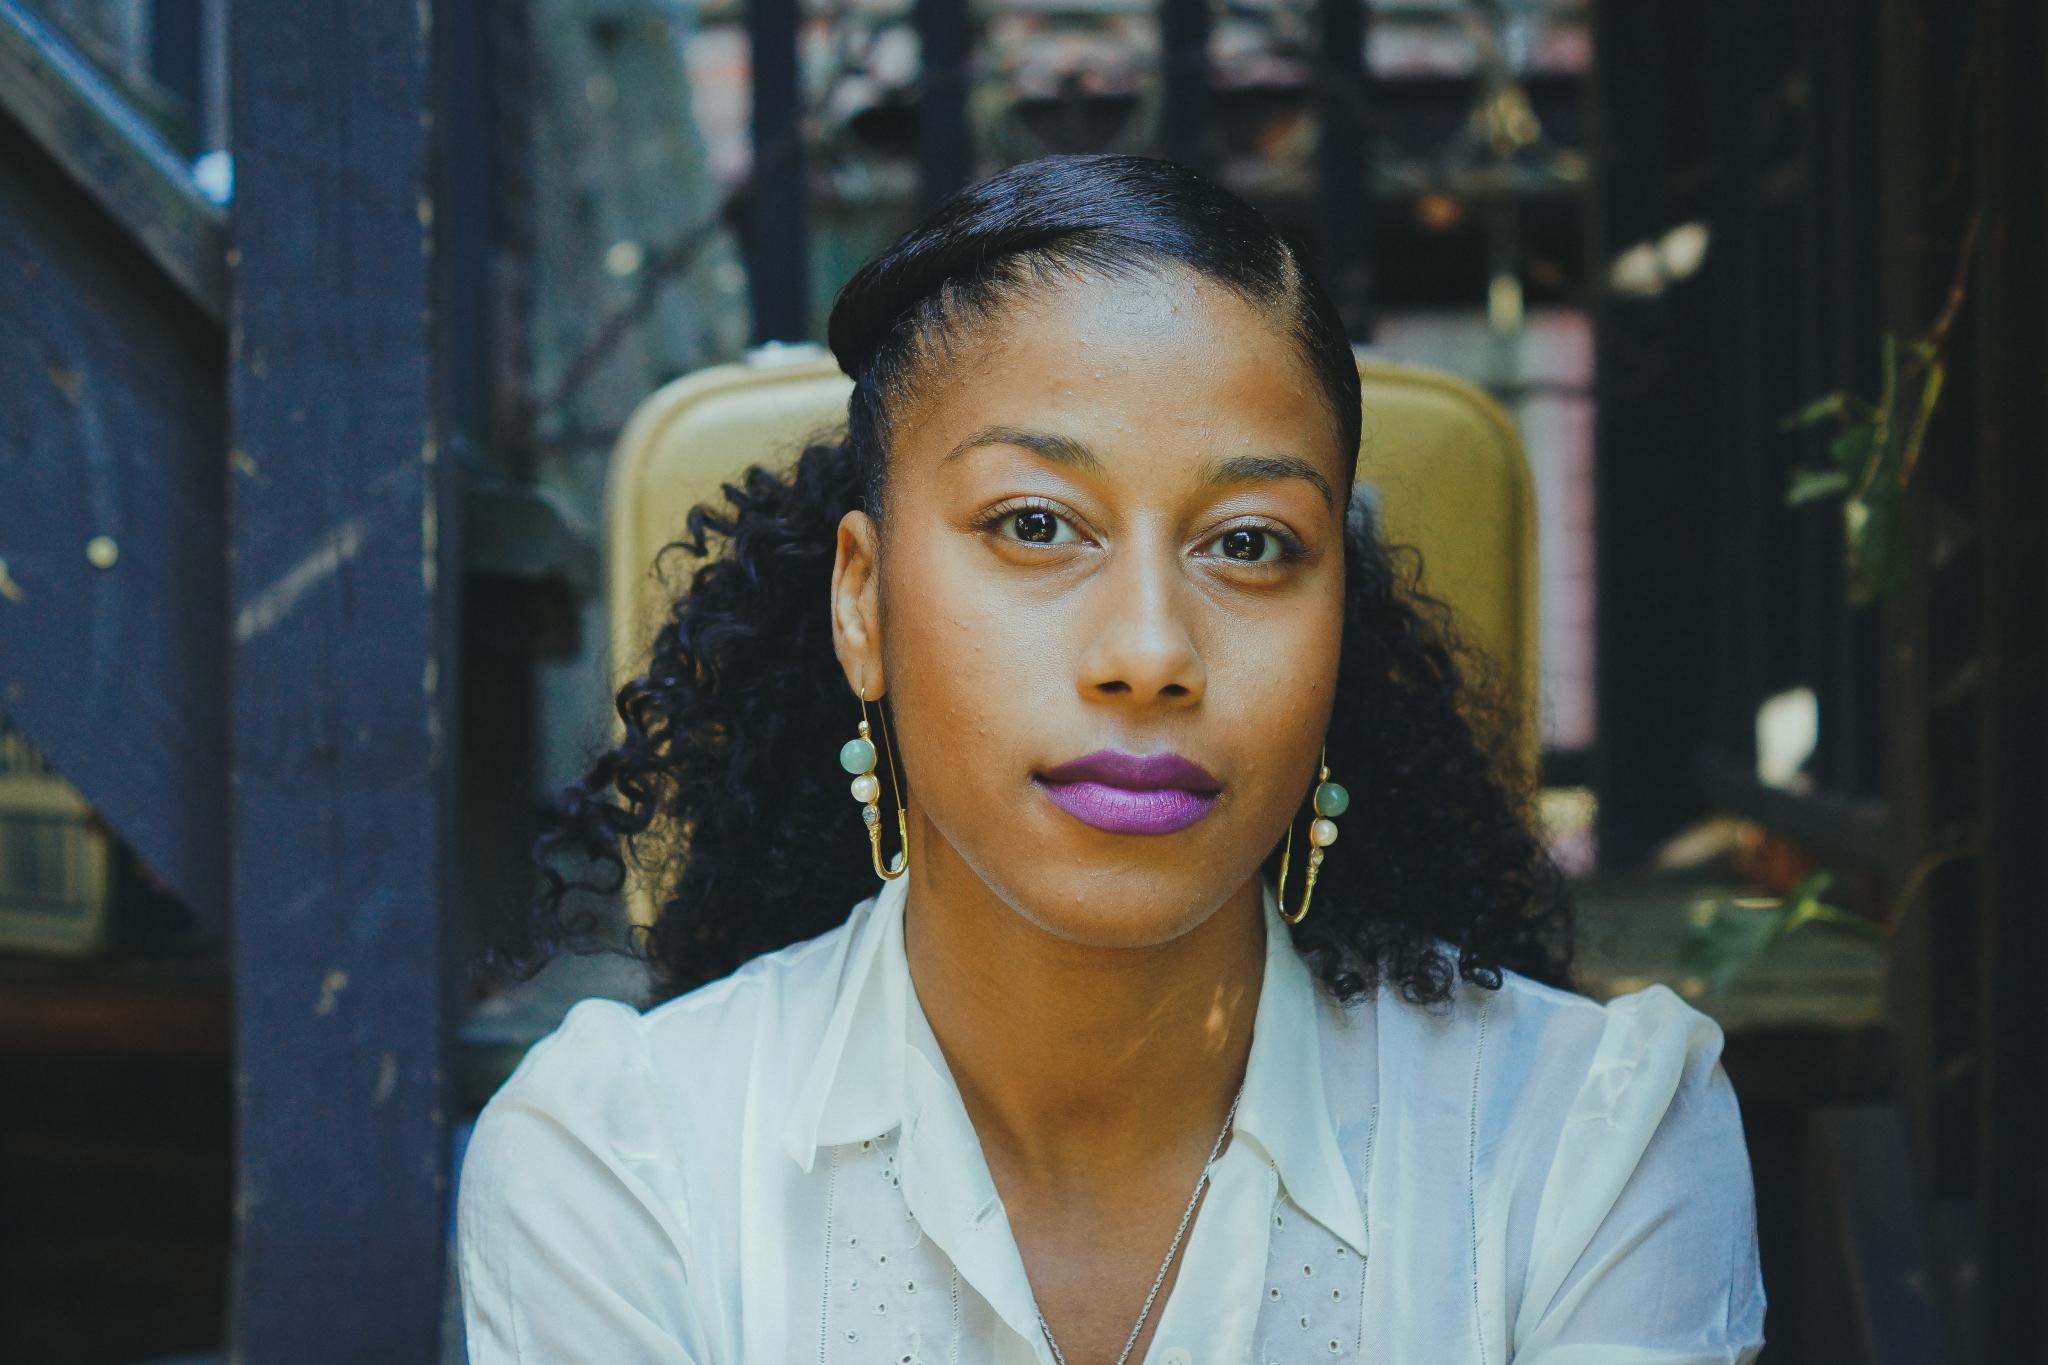 EXCLUSIVE: Poet Aja Monet Explores Love and Courage in New Video for ‘Be Brave’